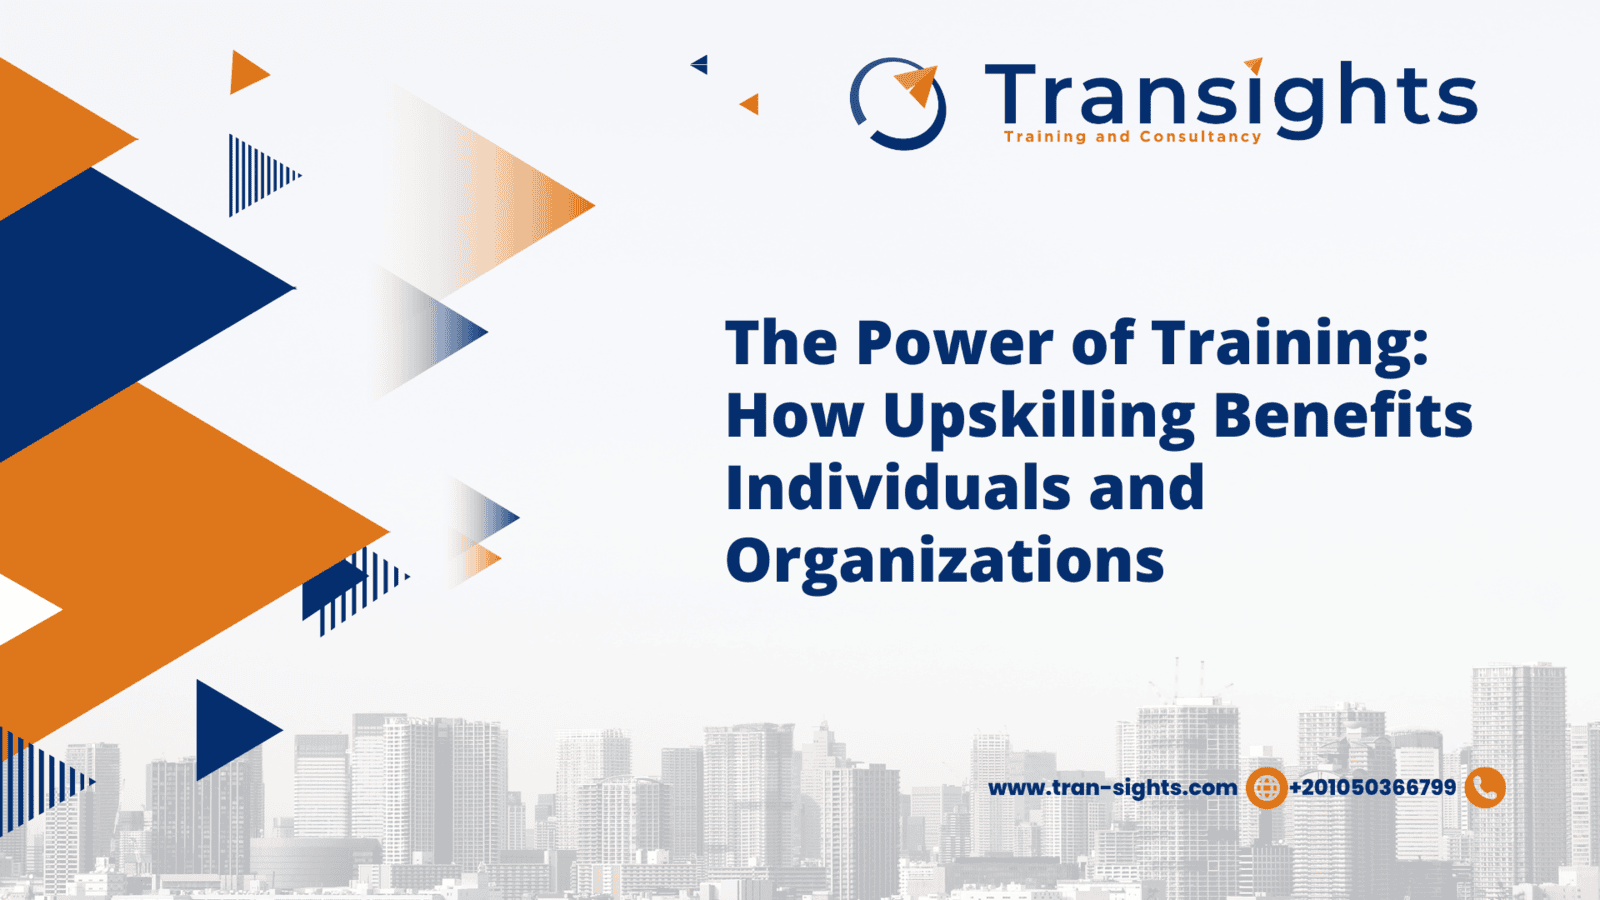 The Power of Training: How Upskilling Benefits Individuals and Organizations